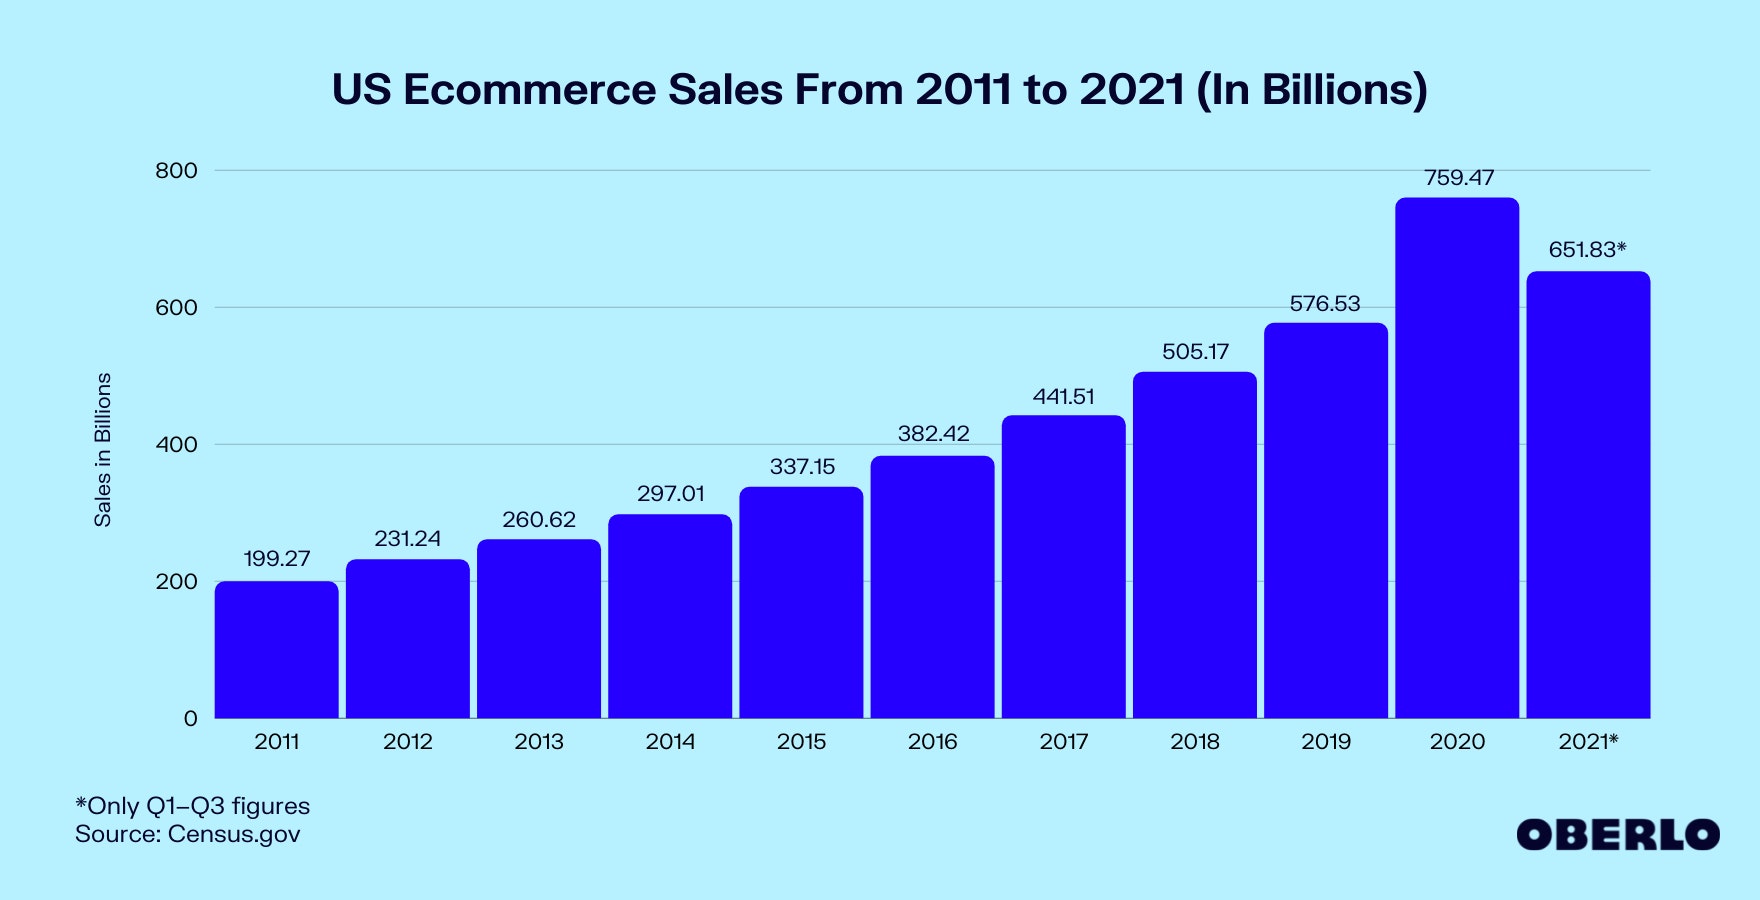 Chart of US Ecommerce Sales From 2011 to 2021 (In Billions)